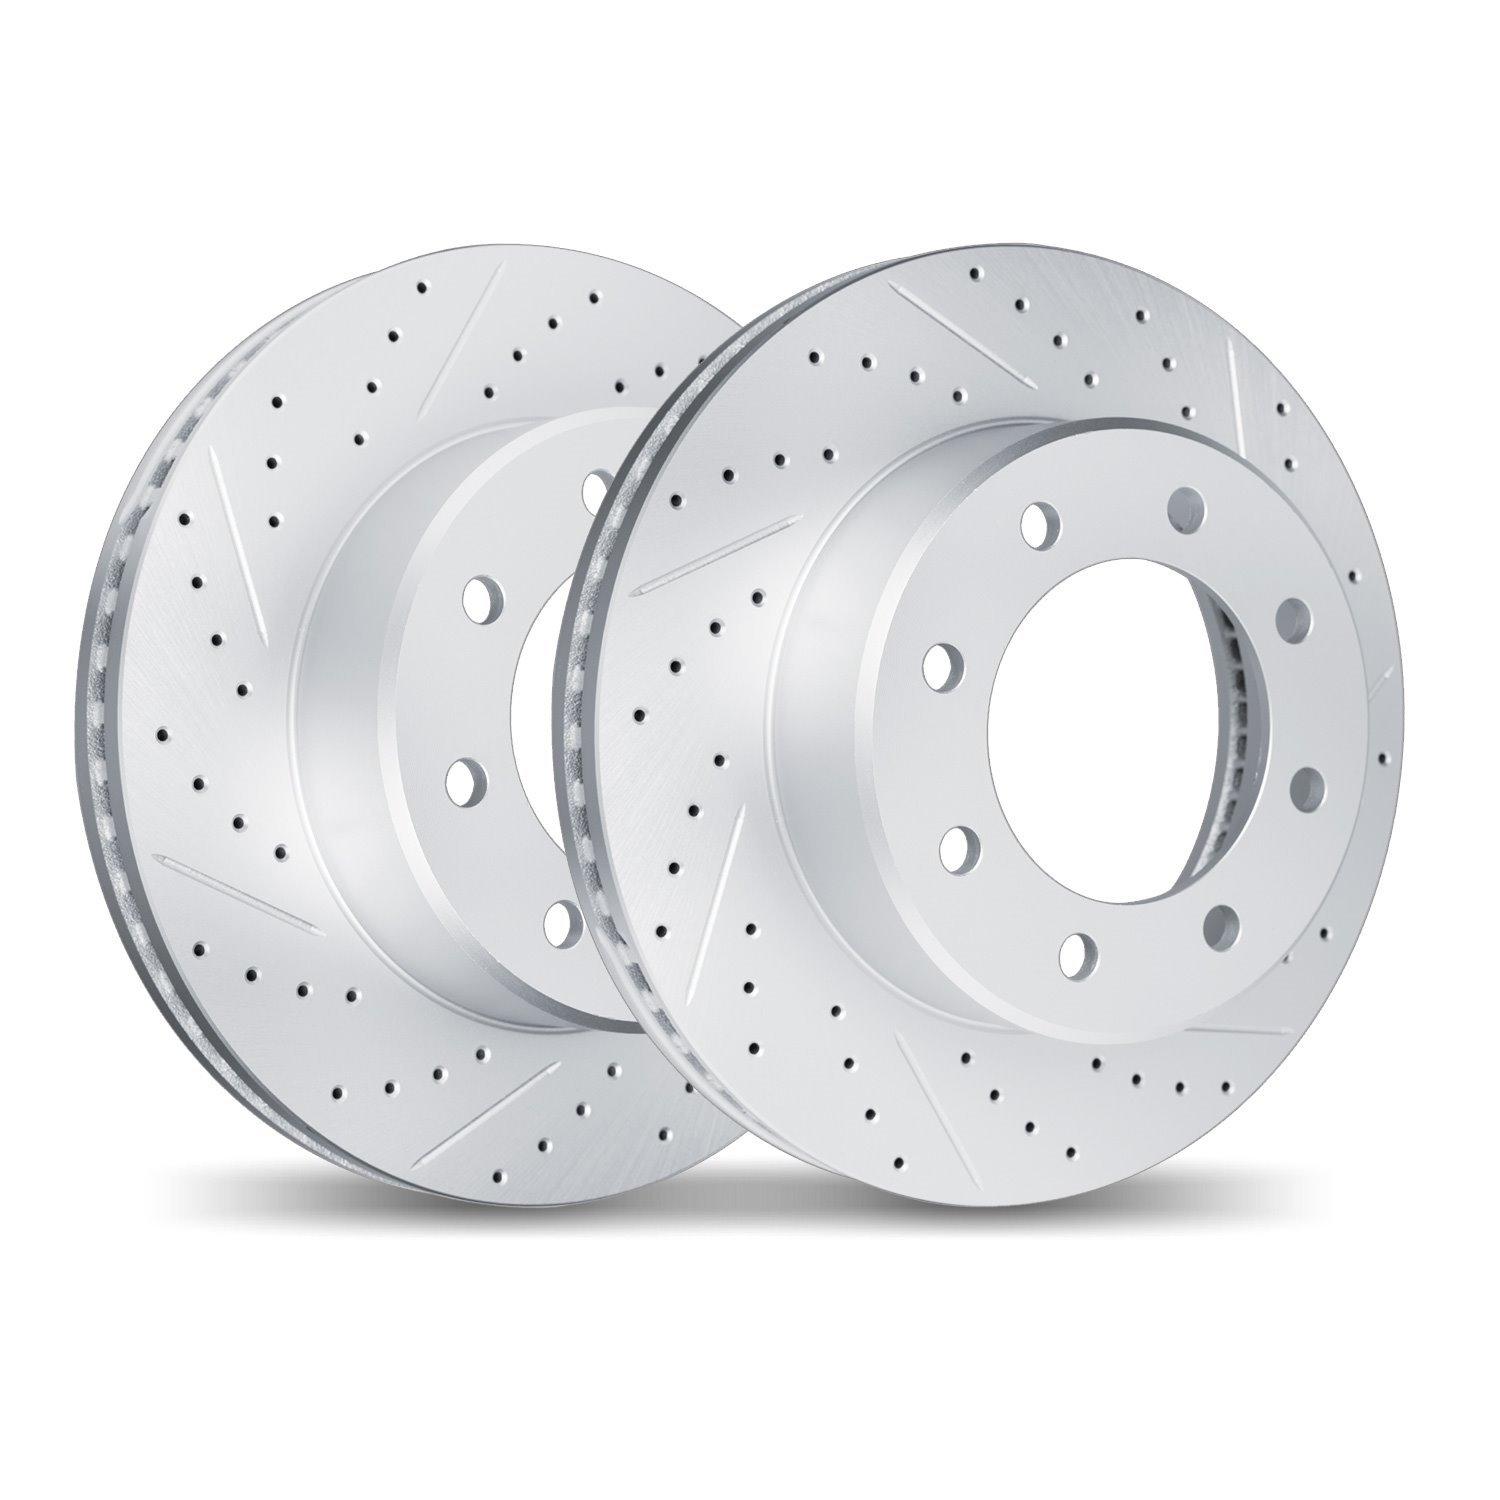 2002-48045 Geoperformance Drilled/Slotted Brake Rotors, 2009-2020 GM, Position: Rear